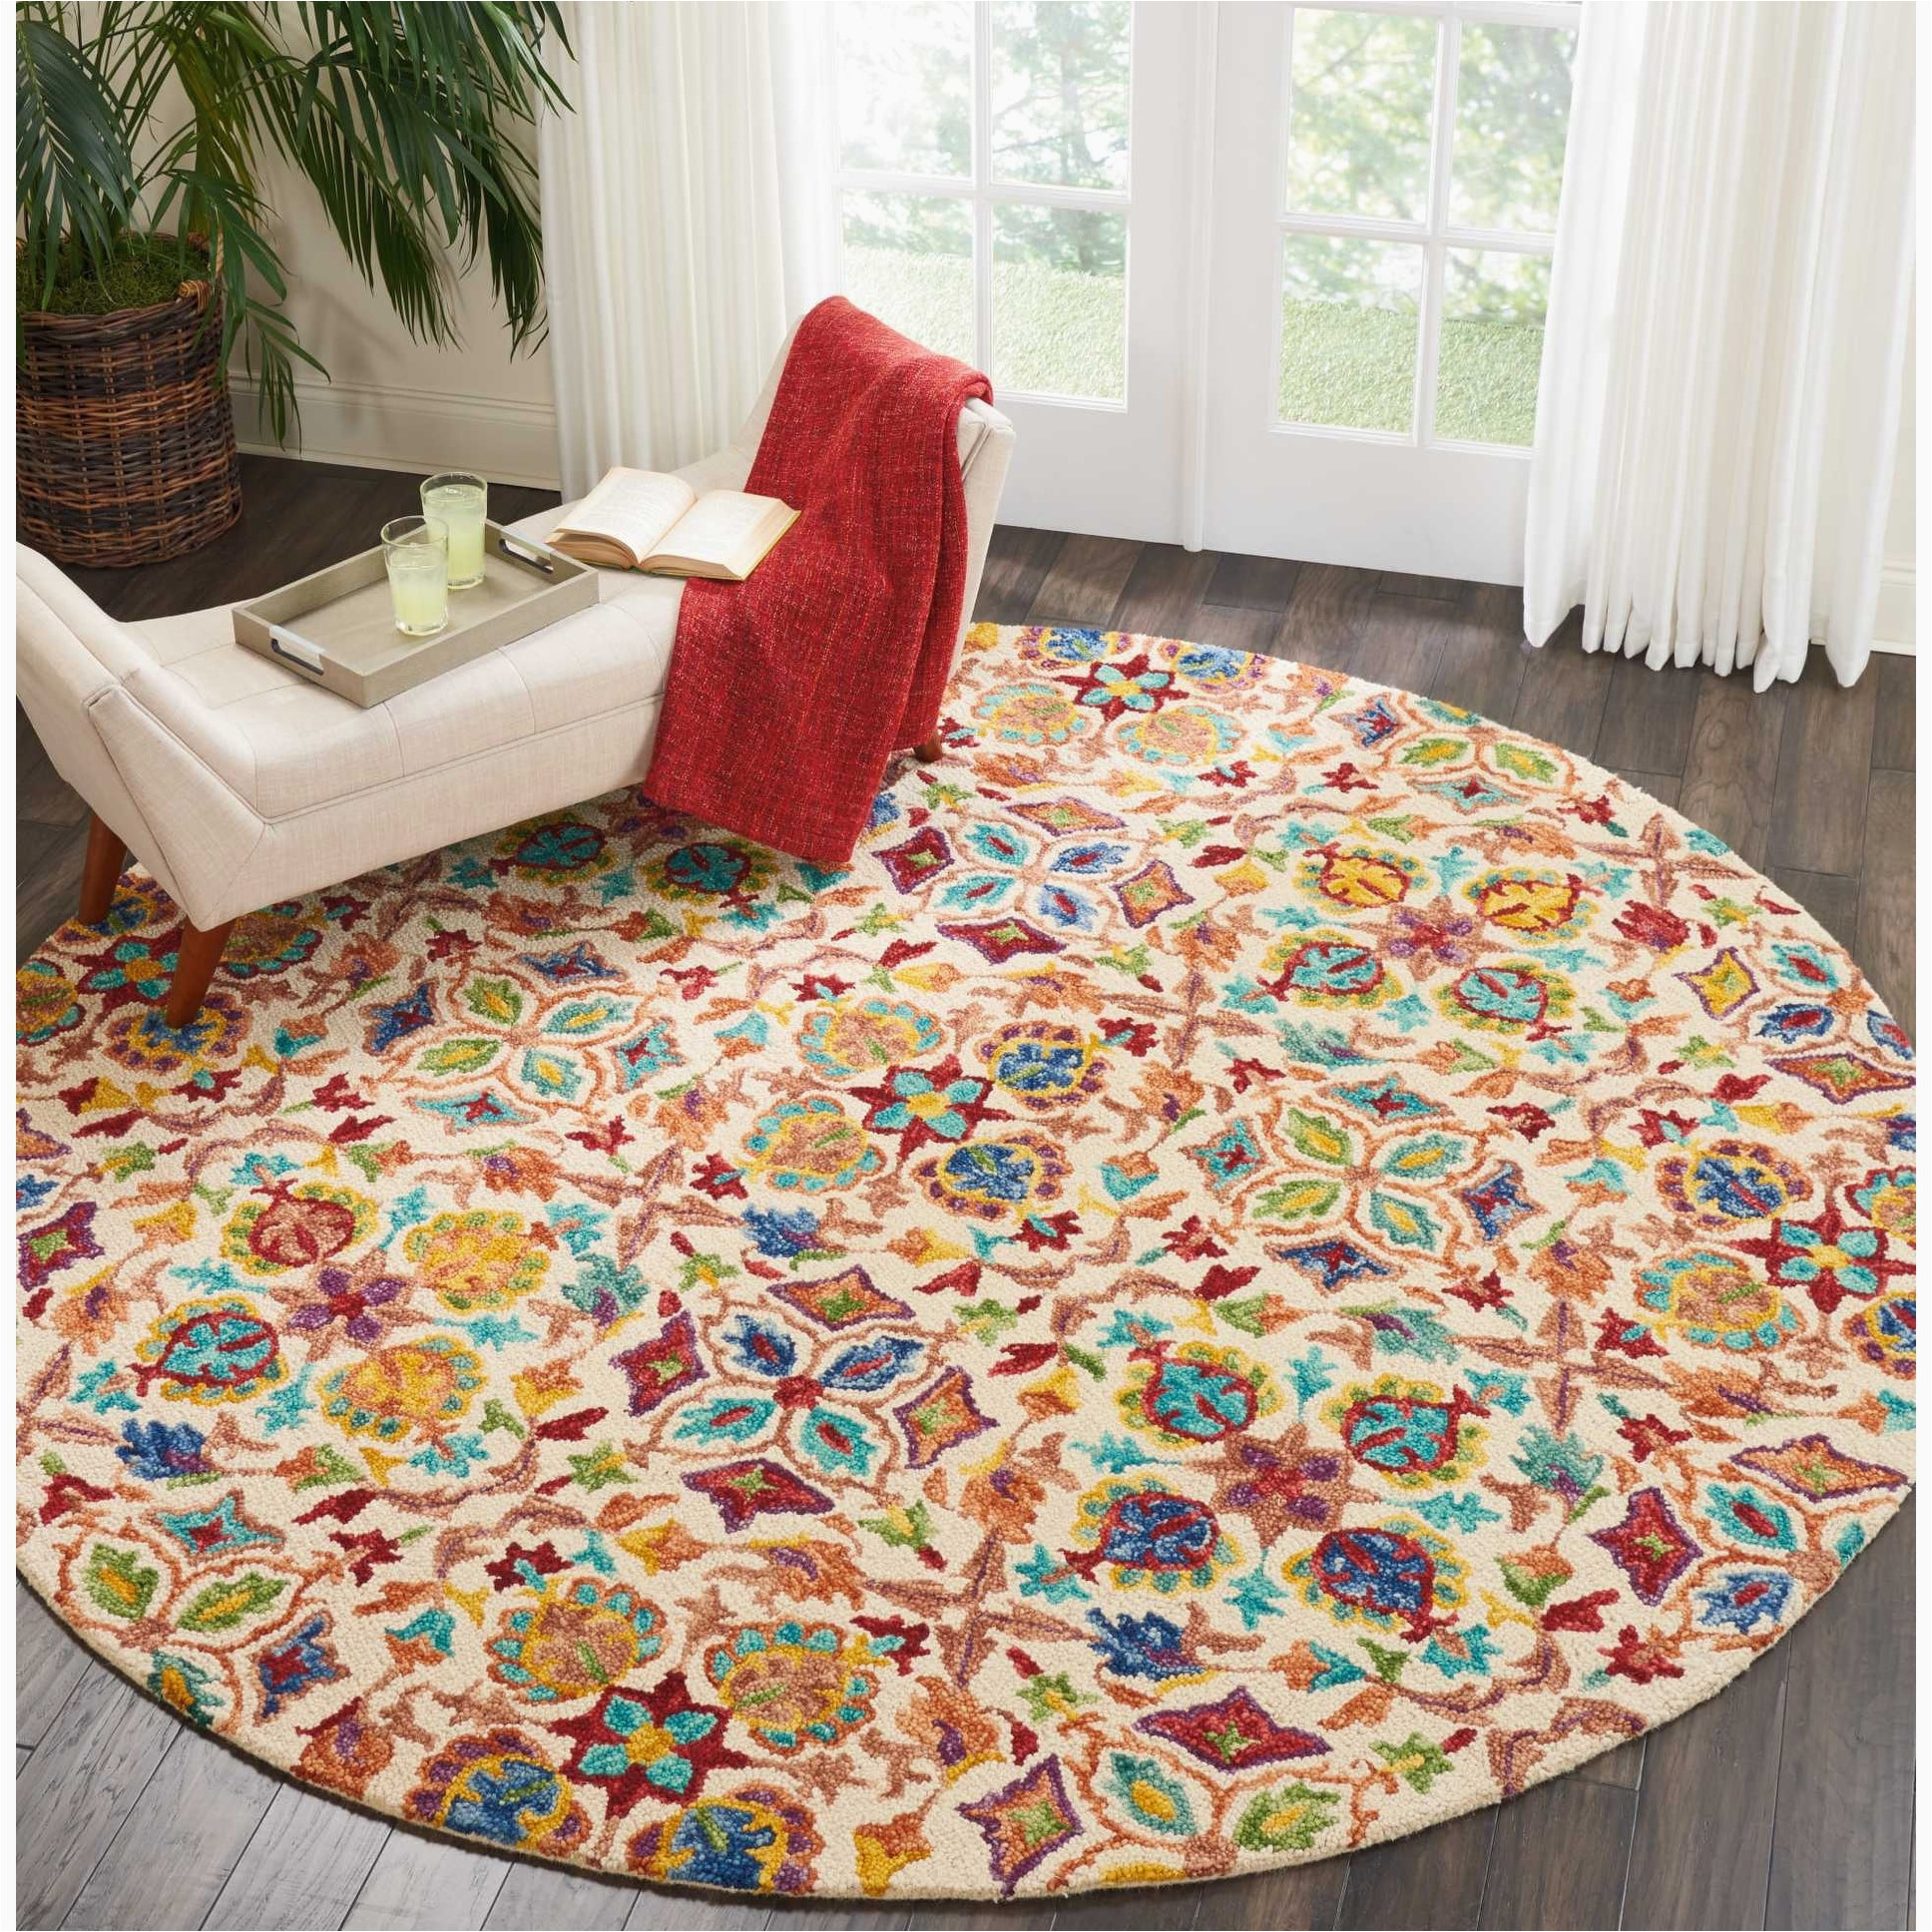 Zosia Hand Tufted Wool Ivory area Rug Nourison Vivid Hand-tufted Floral Wool area Rug